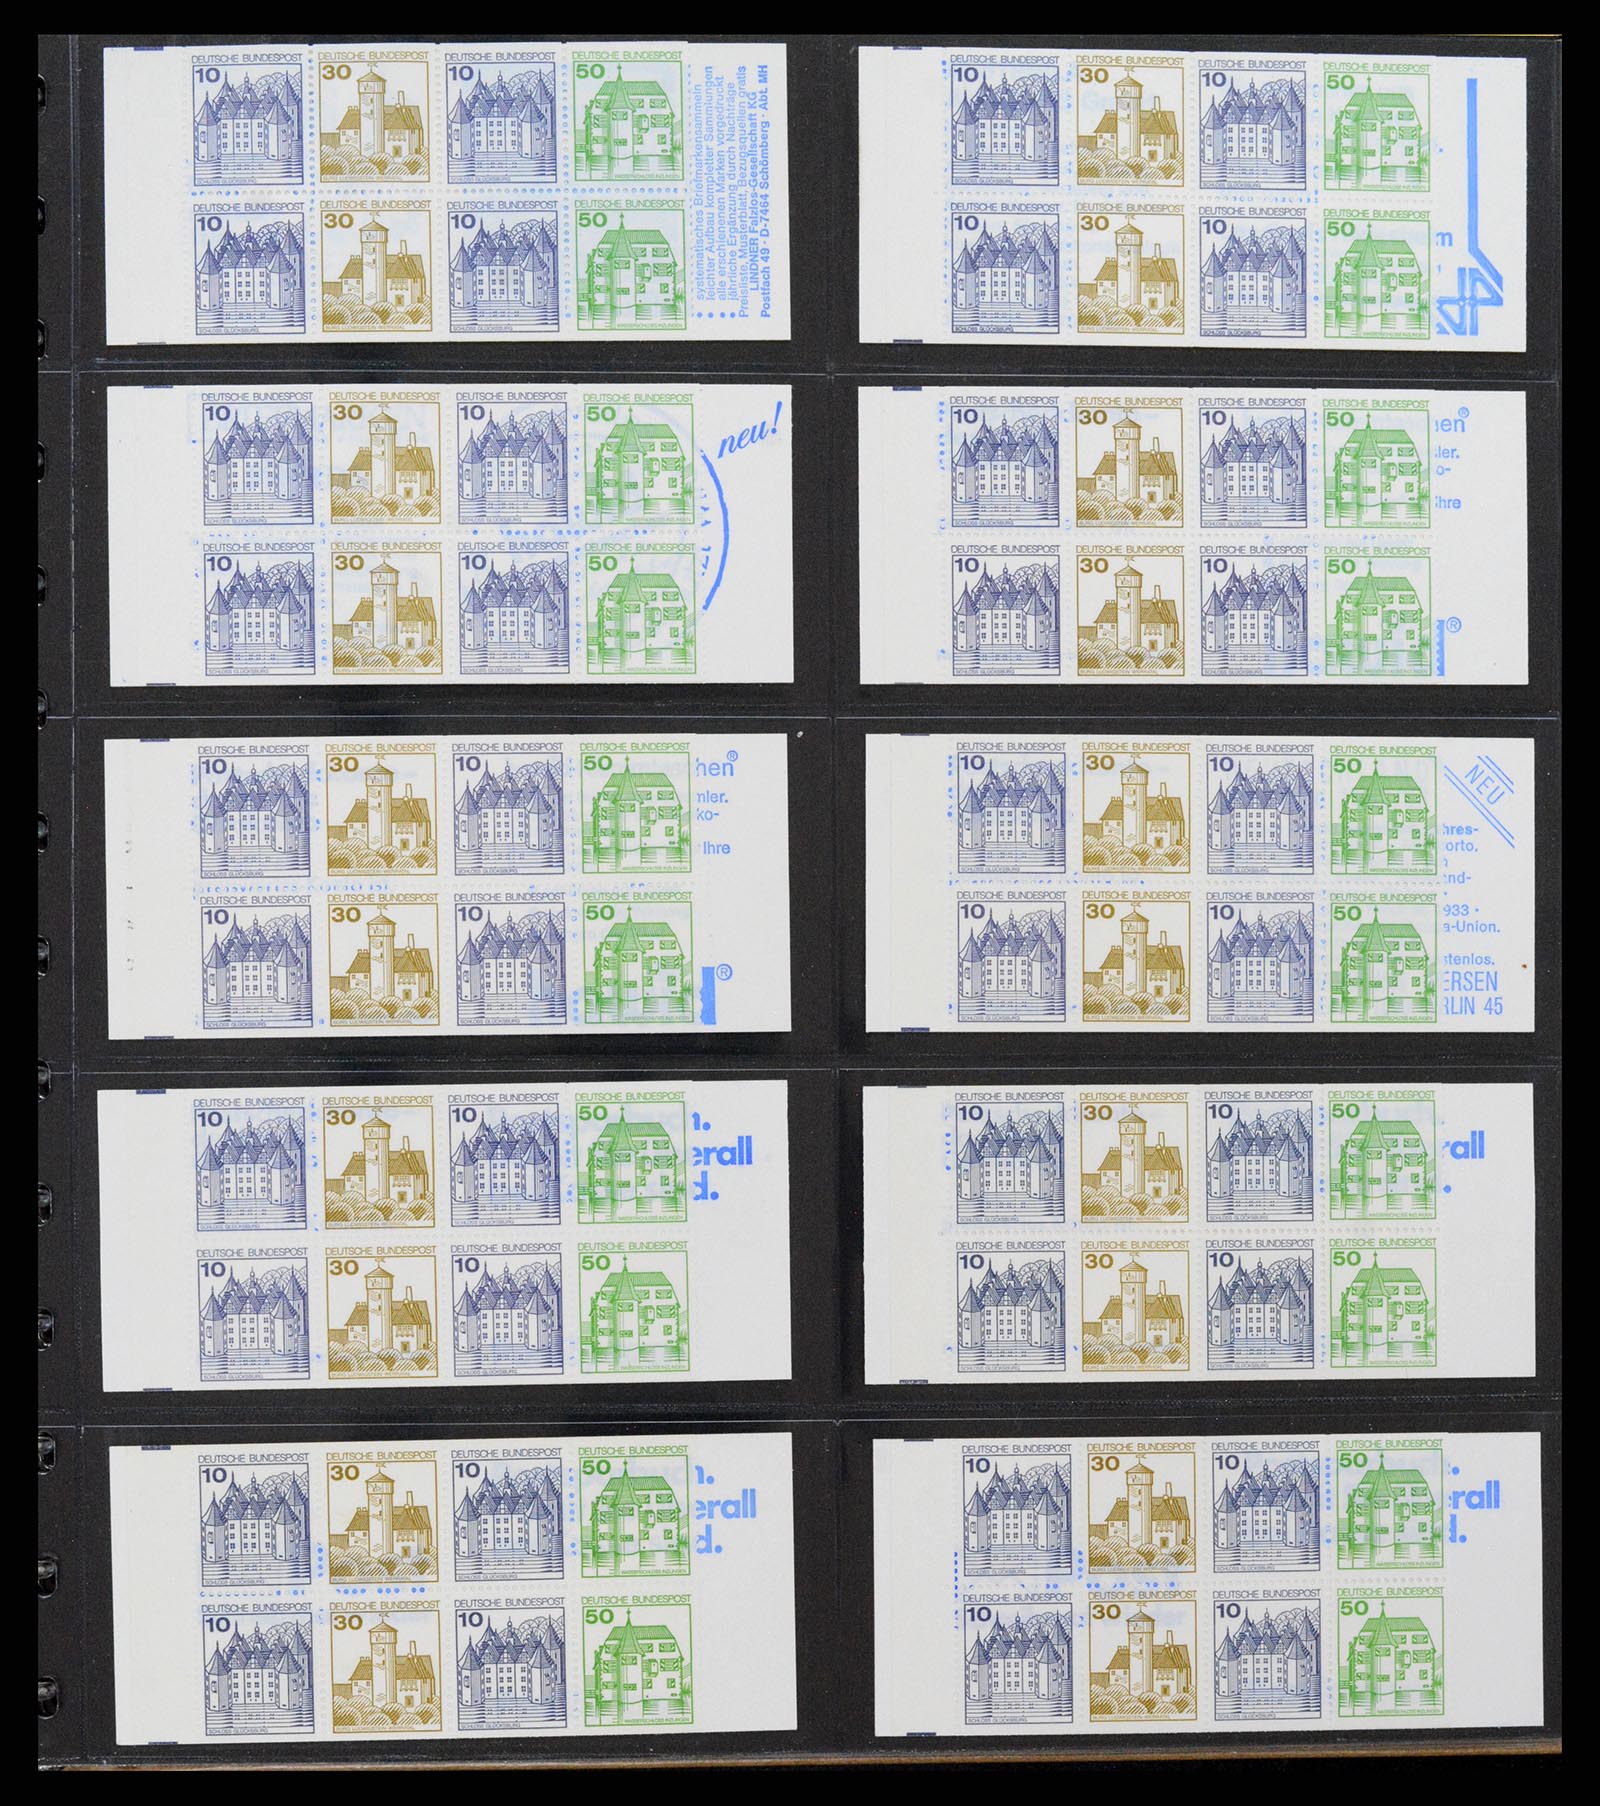 37365 035 - Stamp collection 37365 Bundespost stamp booklets 1951-2001.